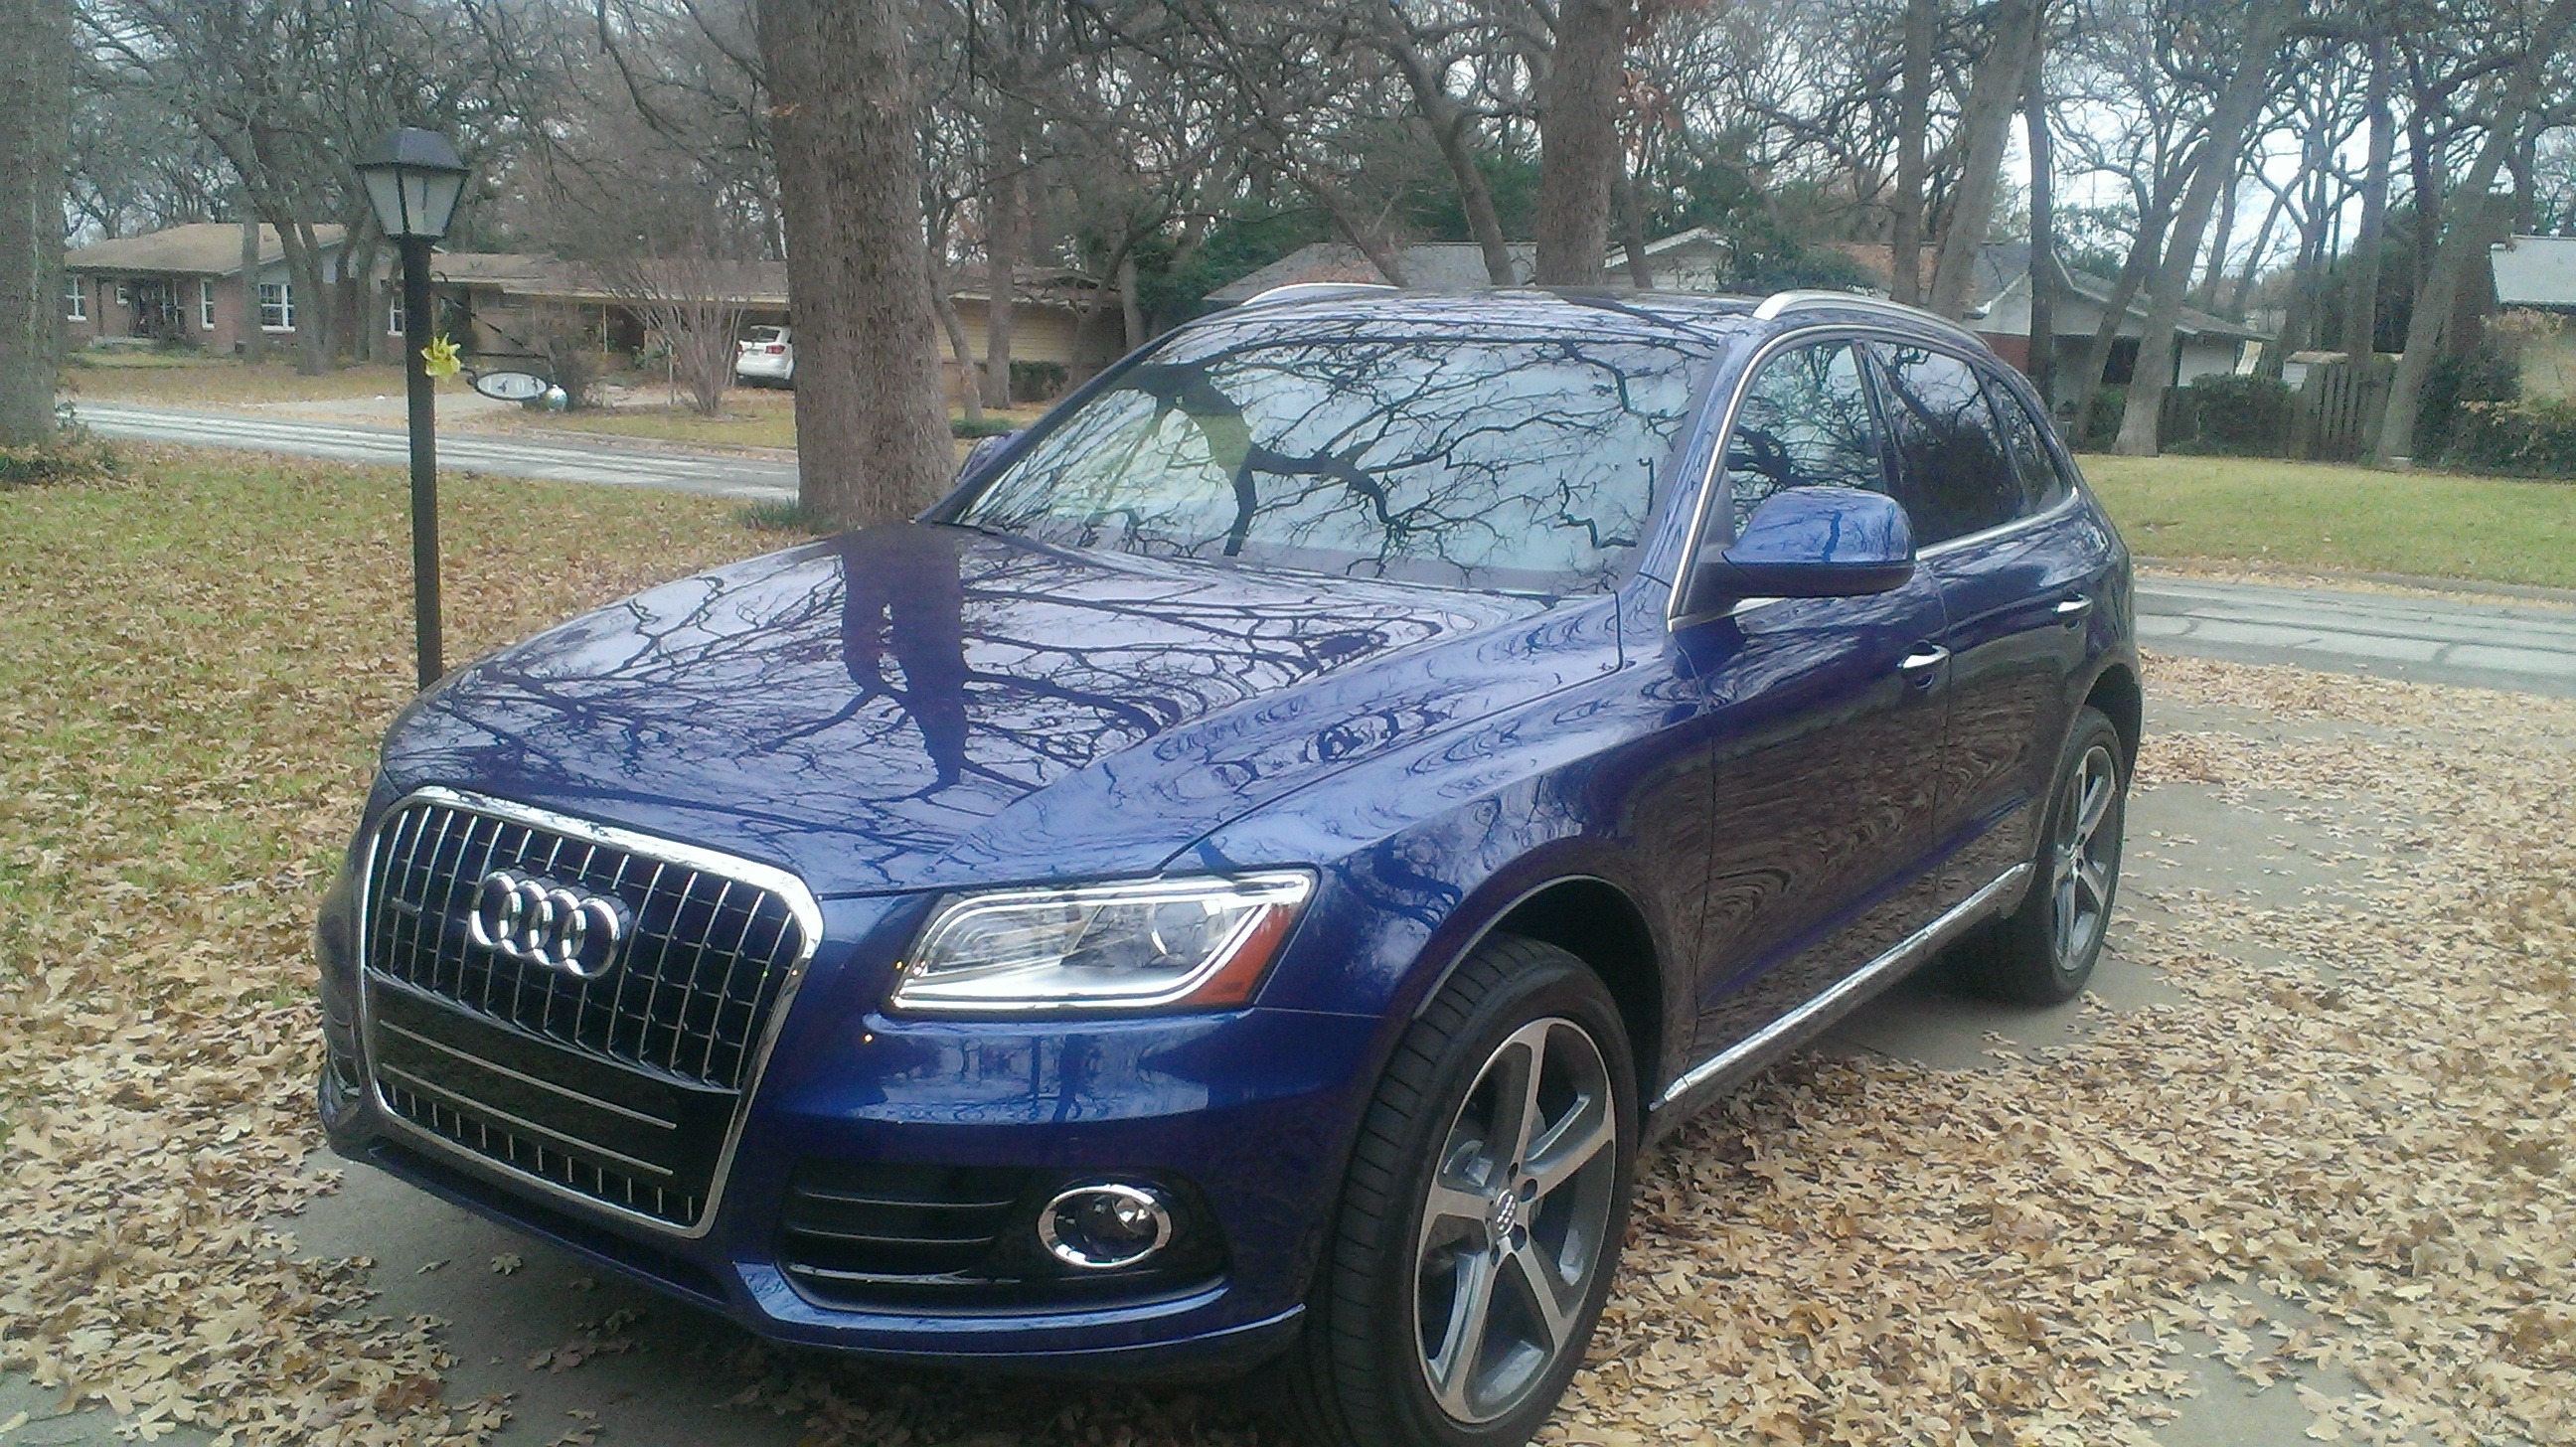 Audi Q5 2015 With 7 Trims The 2015 Audi Q5 Is A Car Made Of Choices Washington Times